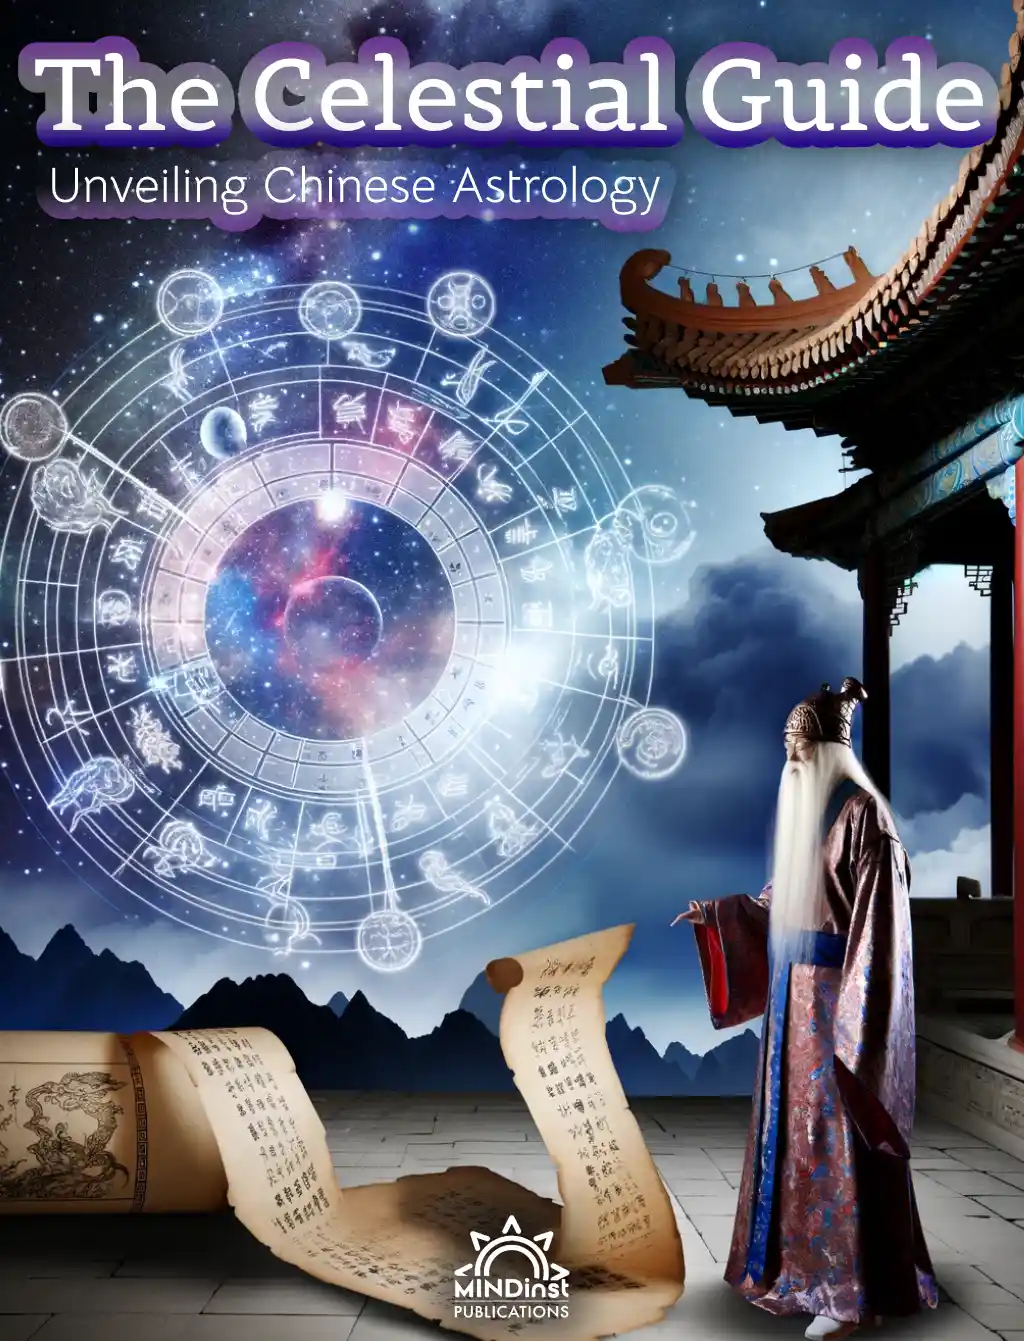 The Celestial Guide UnveilingaChinese Astrology